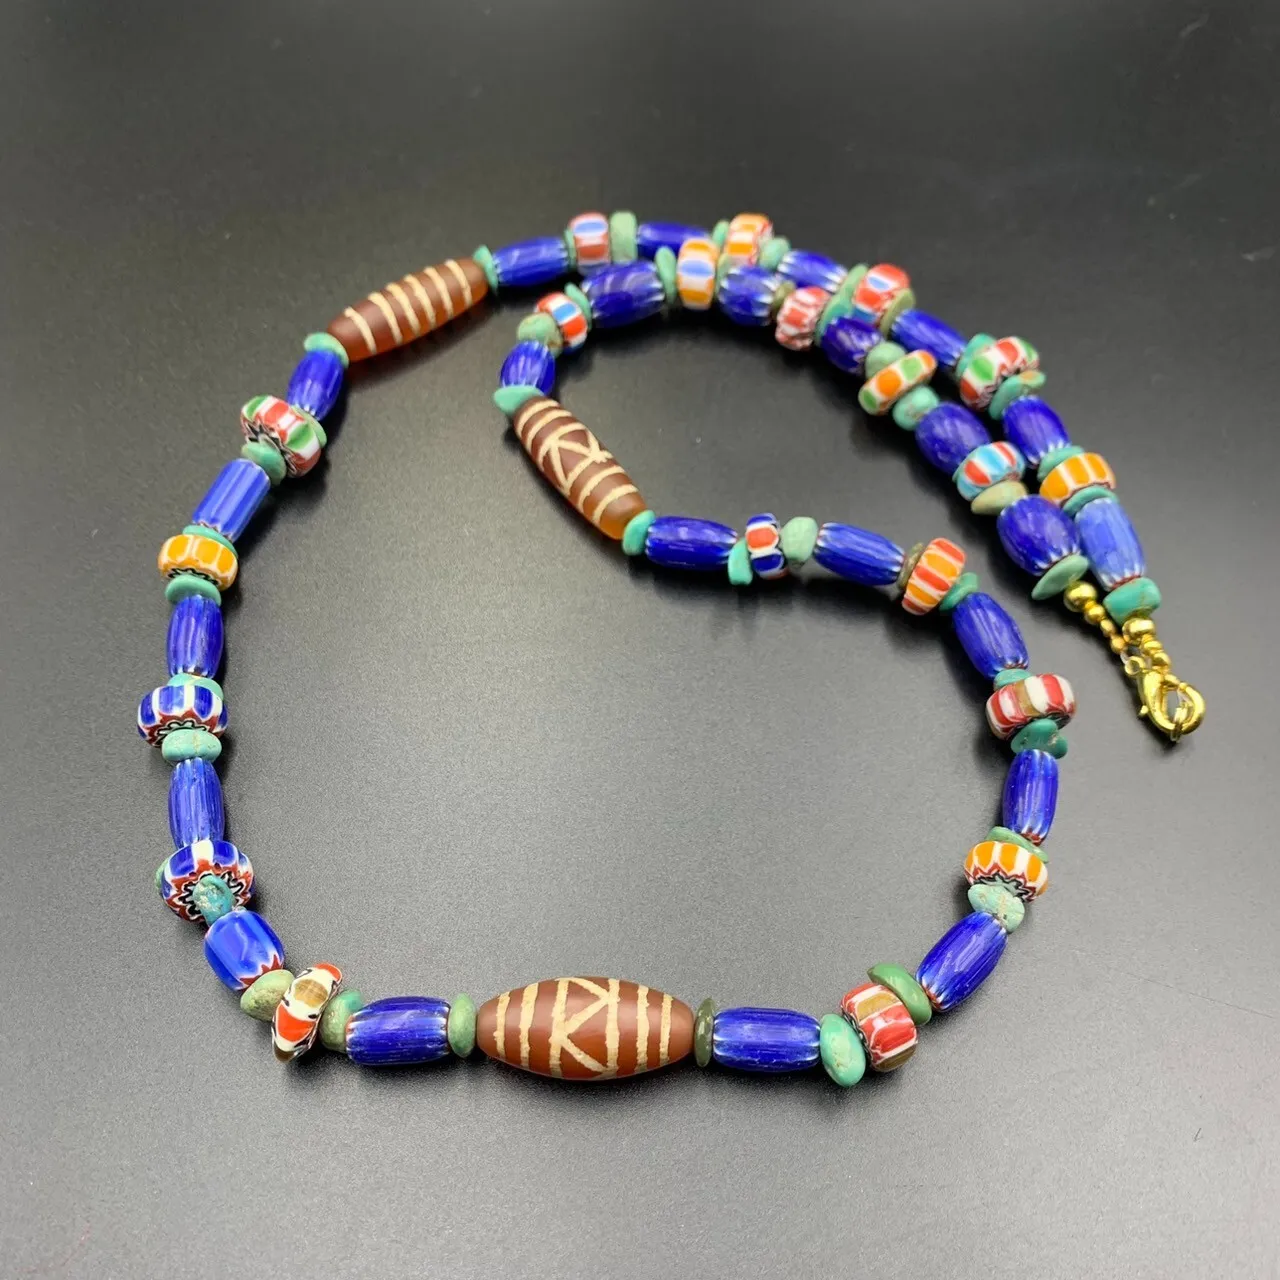 Beautiful Chevron Trade Glass Beads With Antique Etched Agate Beads Necklace, LBBR-30 - Image 6 of 6